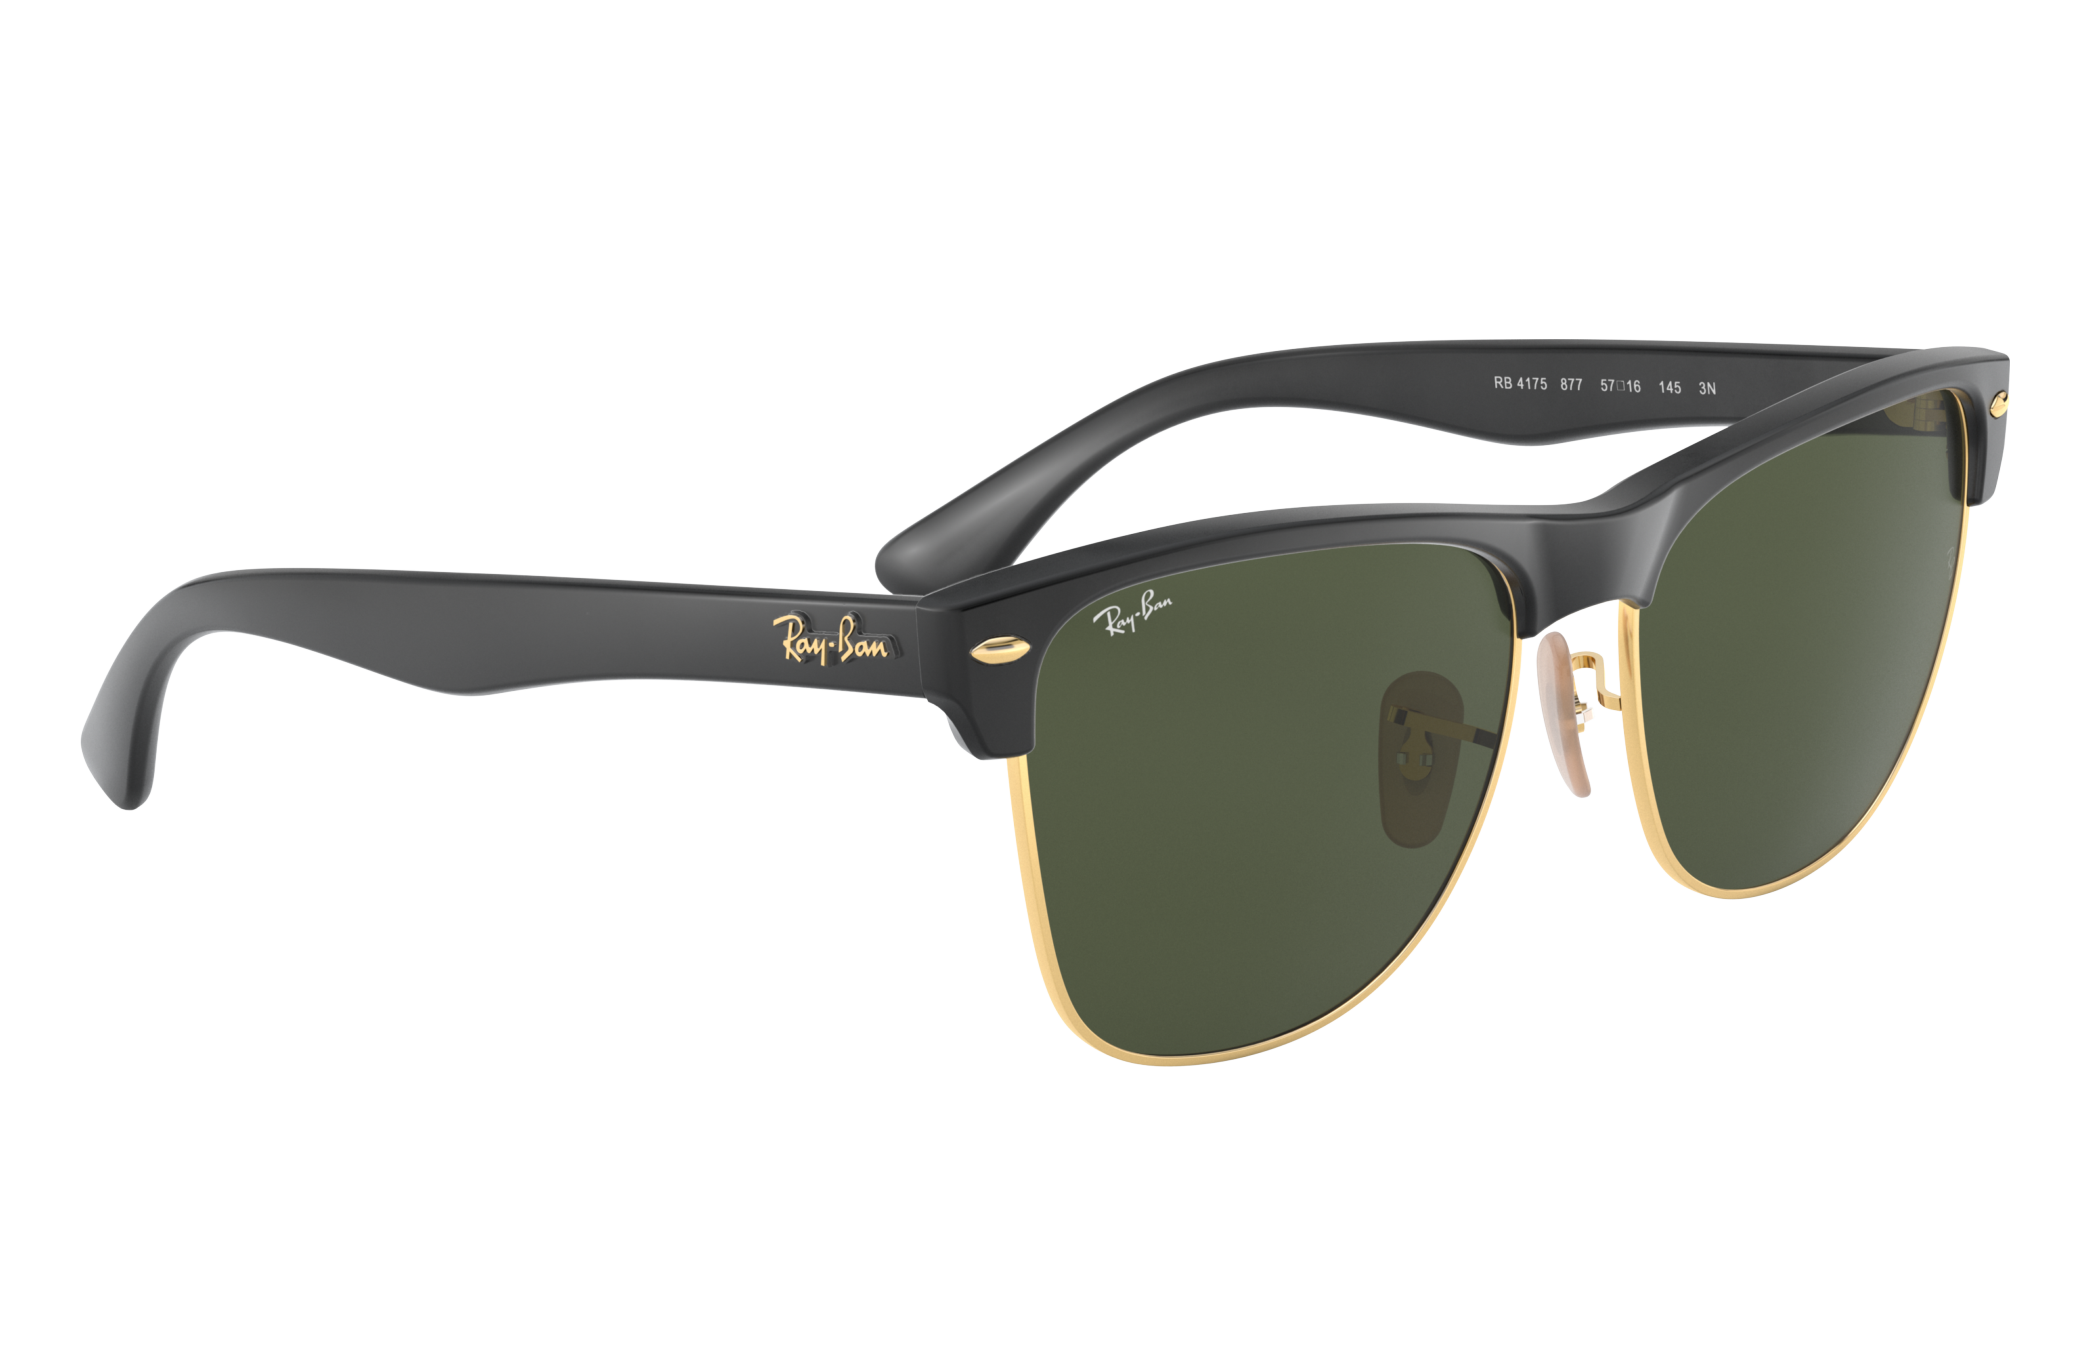 ray ban 0rb4175 square sunglasses